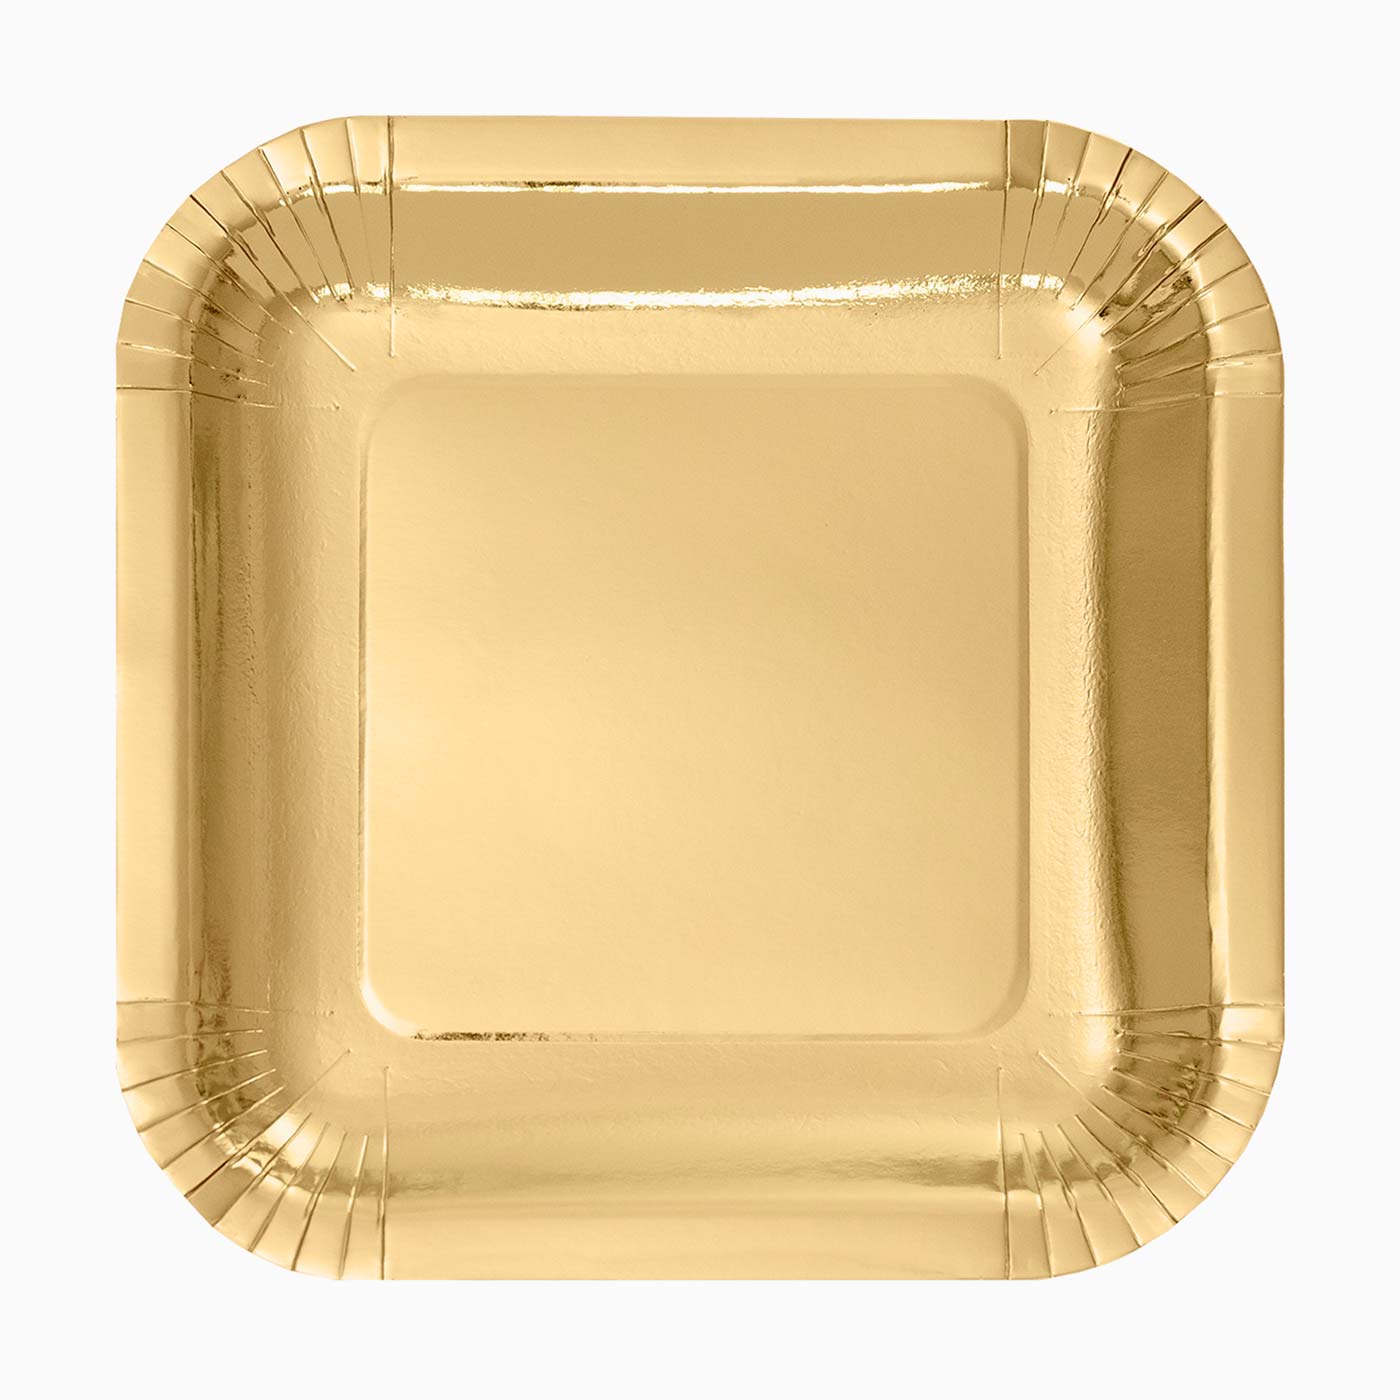 Metallized square cardboard plate 26 x 26 cm gold